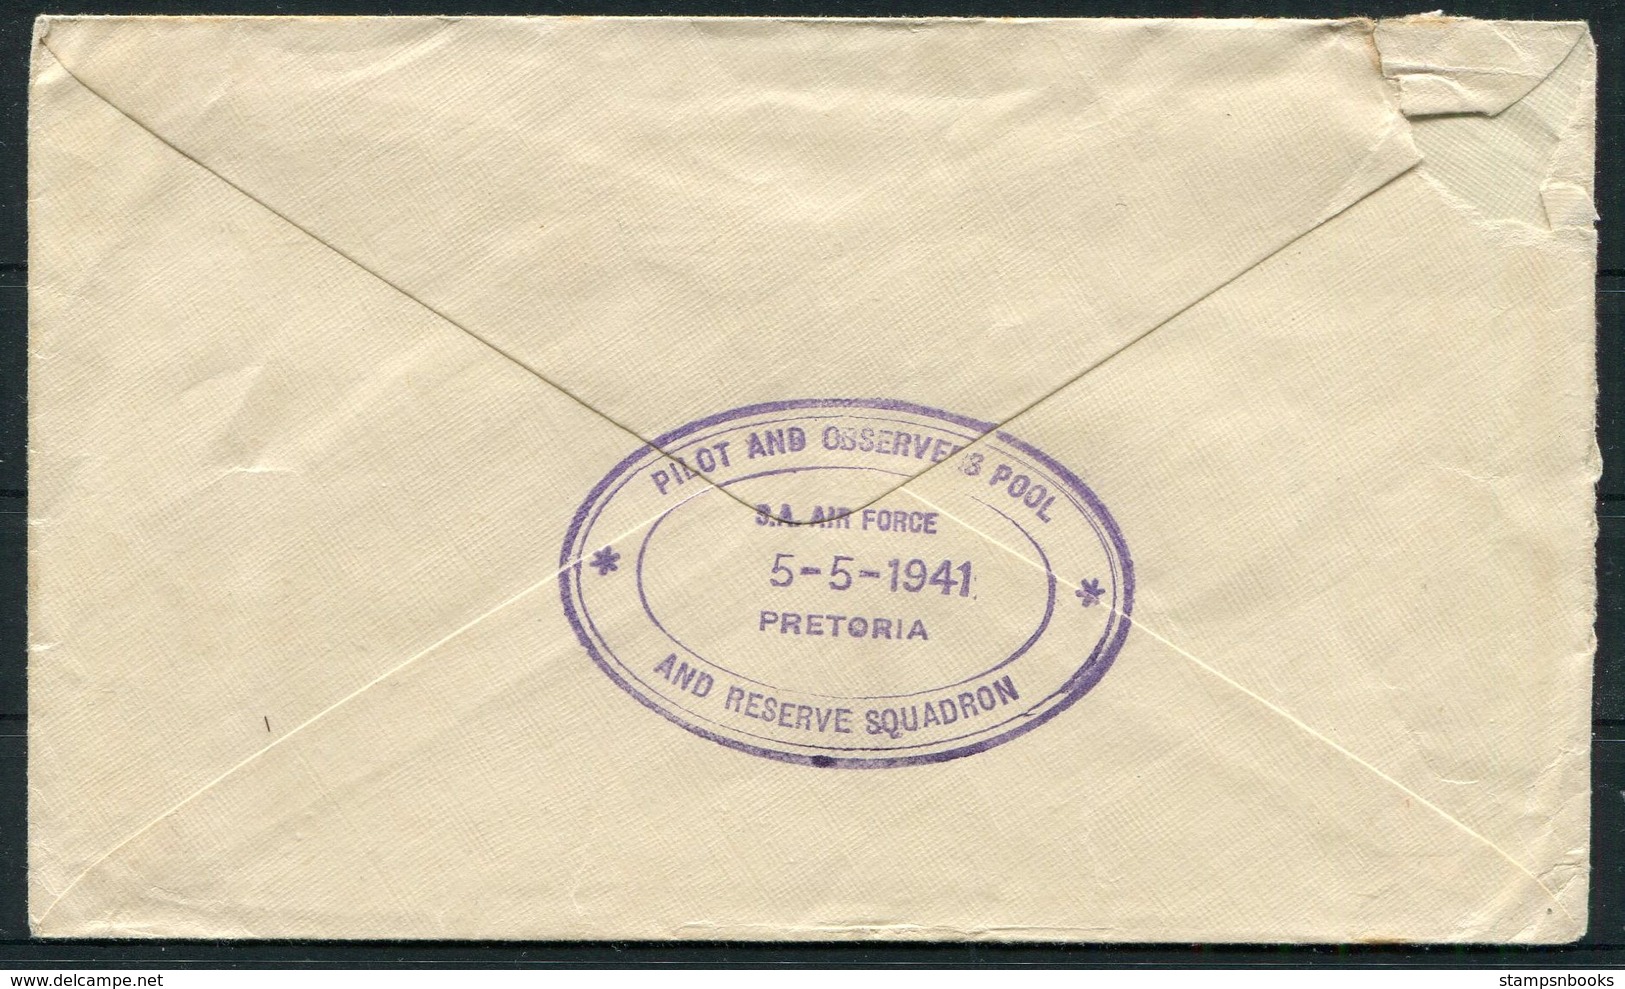 1941 South Africa, Zwartkop Air Station OAS Cover . Pilot And Observers Pool And Reserve Squadron, S.A.A.F. Pretoria - Covers & Documents